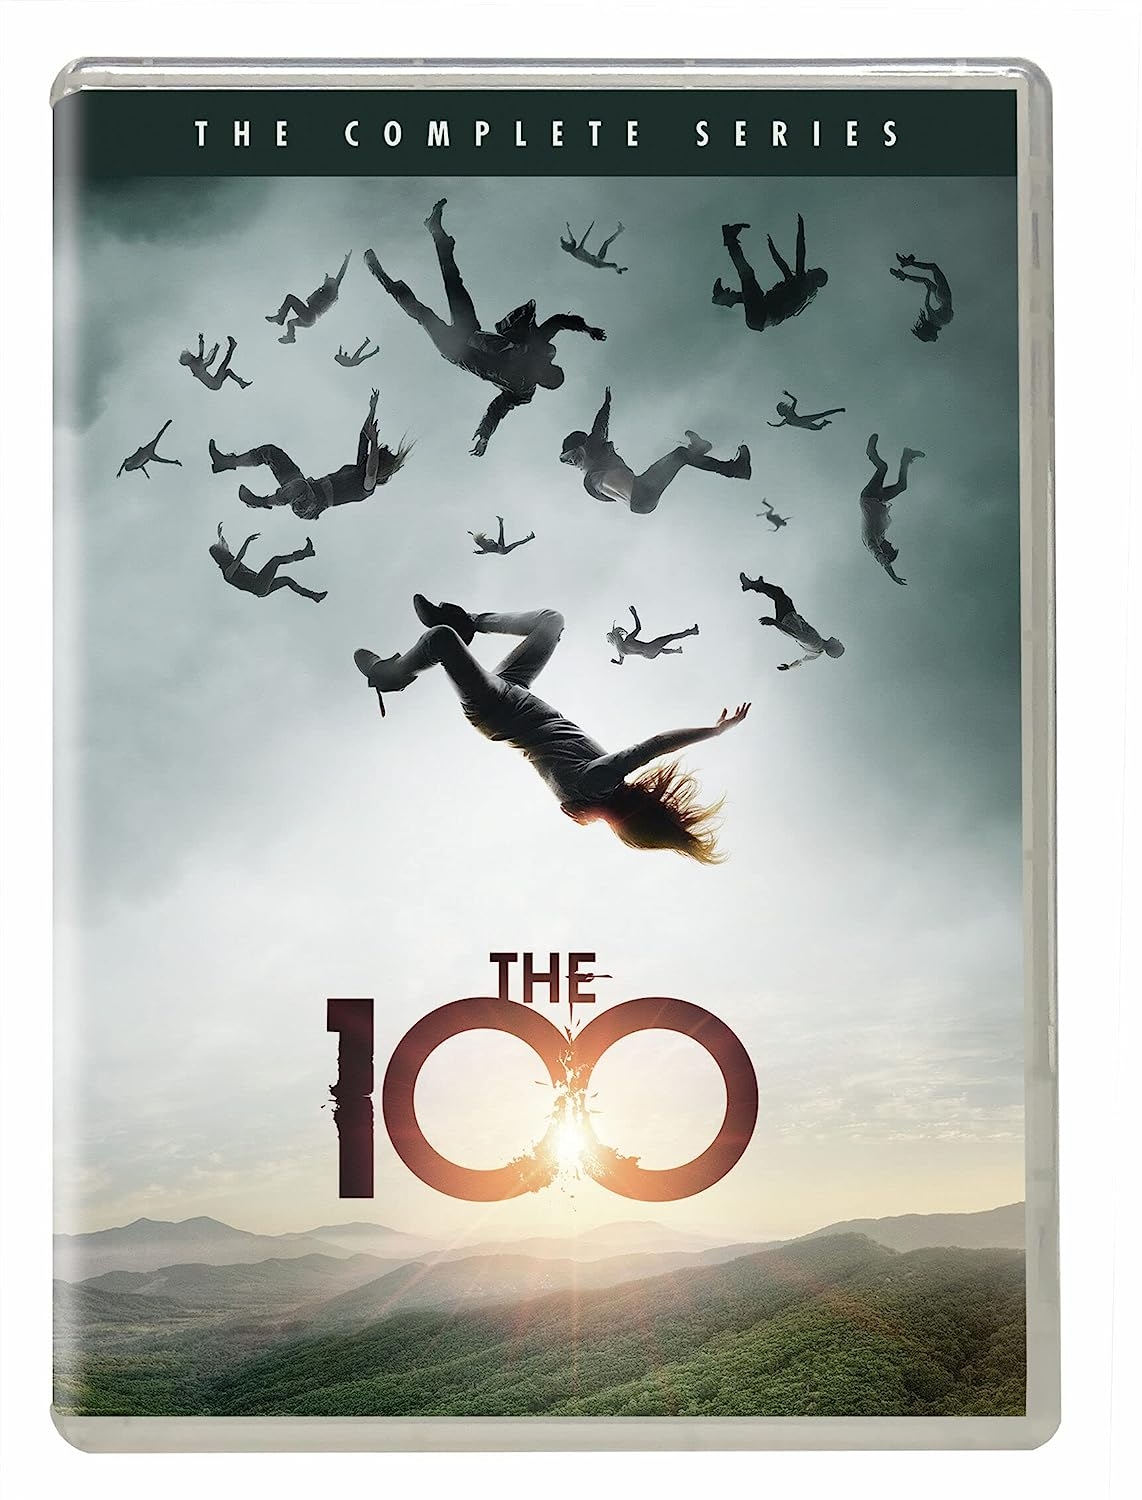 The 100: The Complete Series   price checker   price checker Description Gallery Reviews Variations Additional details Product